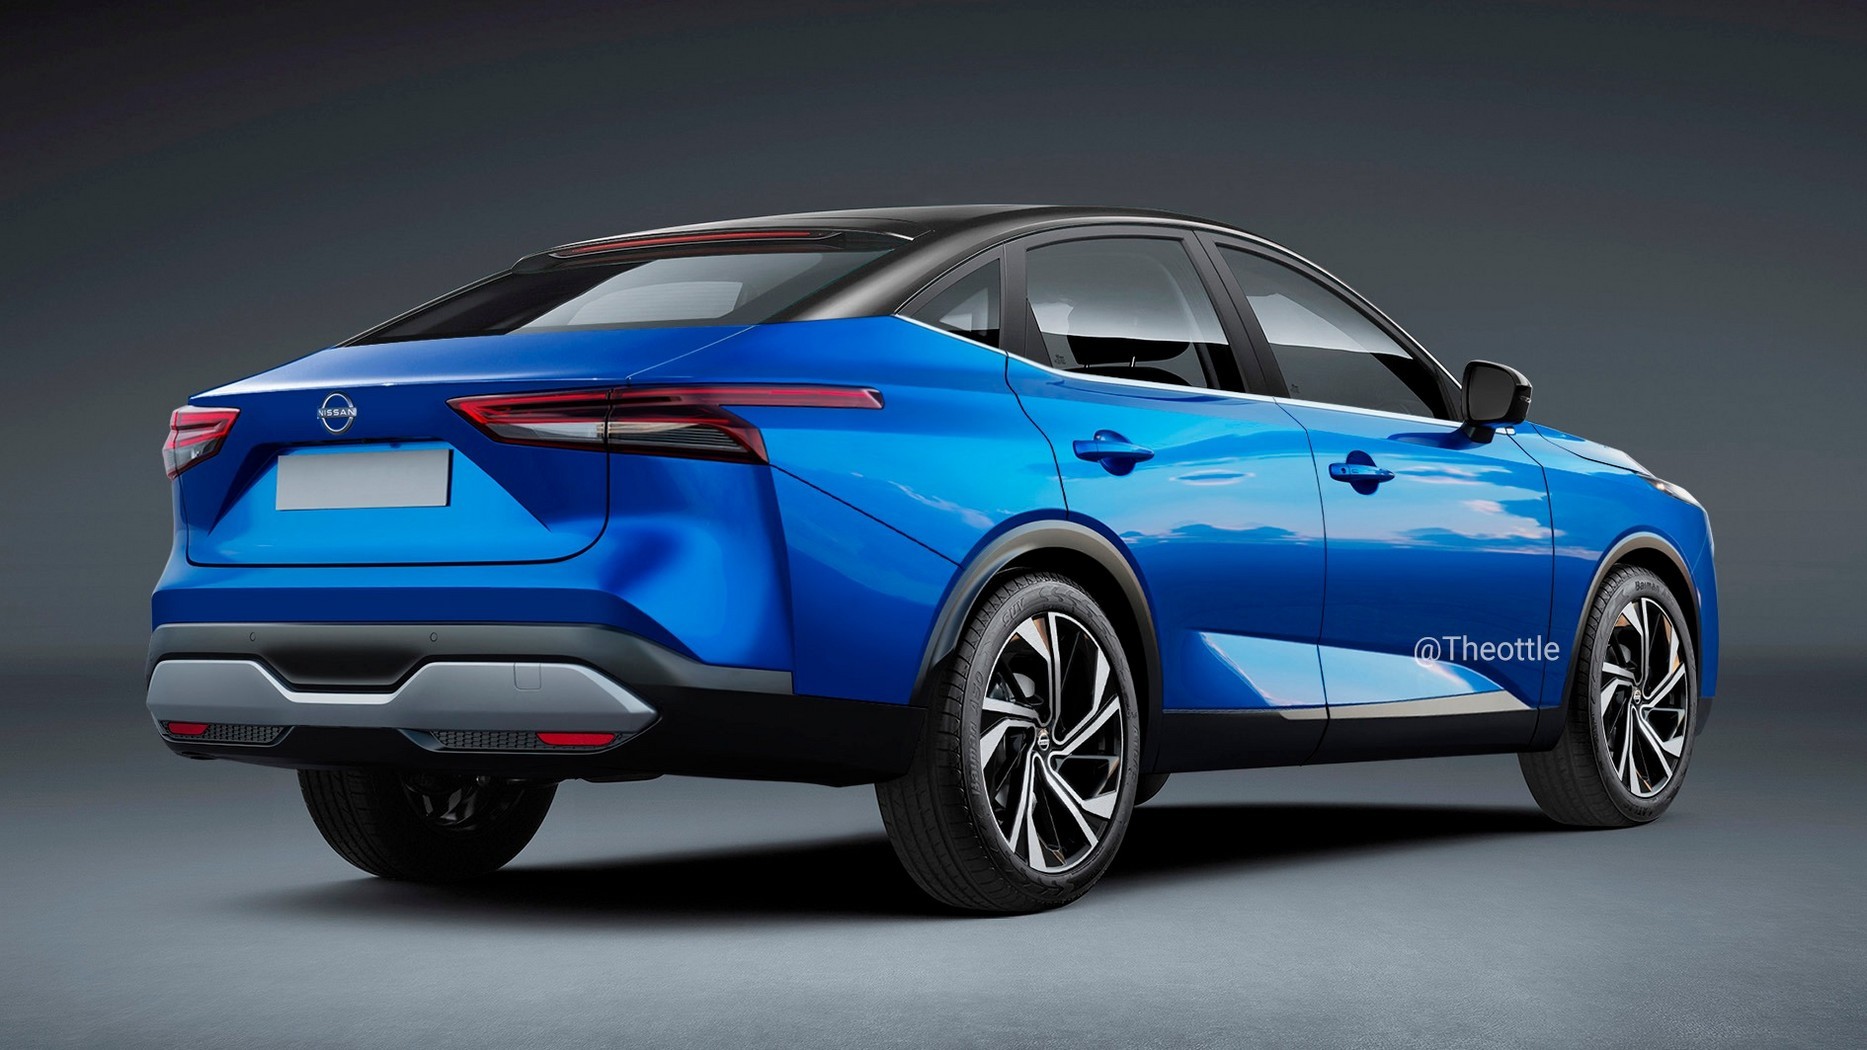 Nissan Maxima Could Survive in Crossover Body and With Qashqai's Front